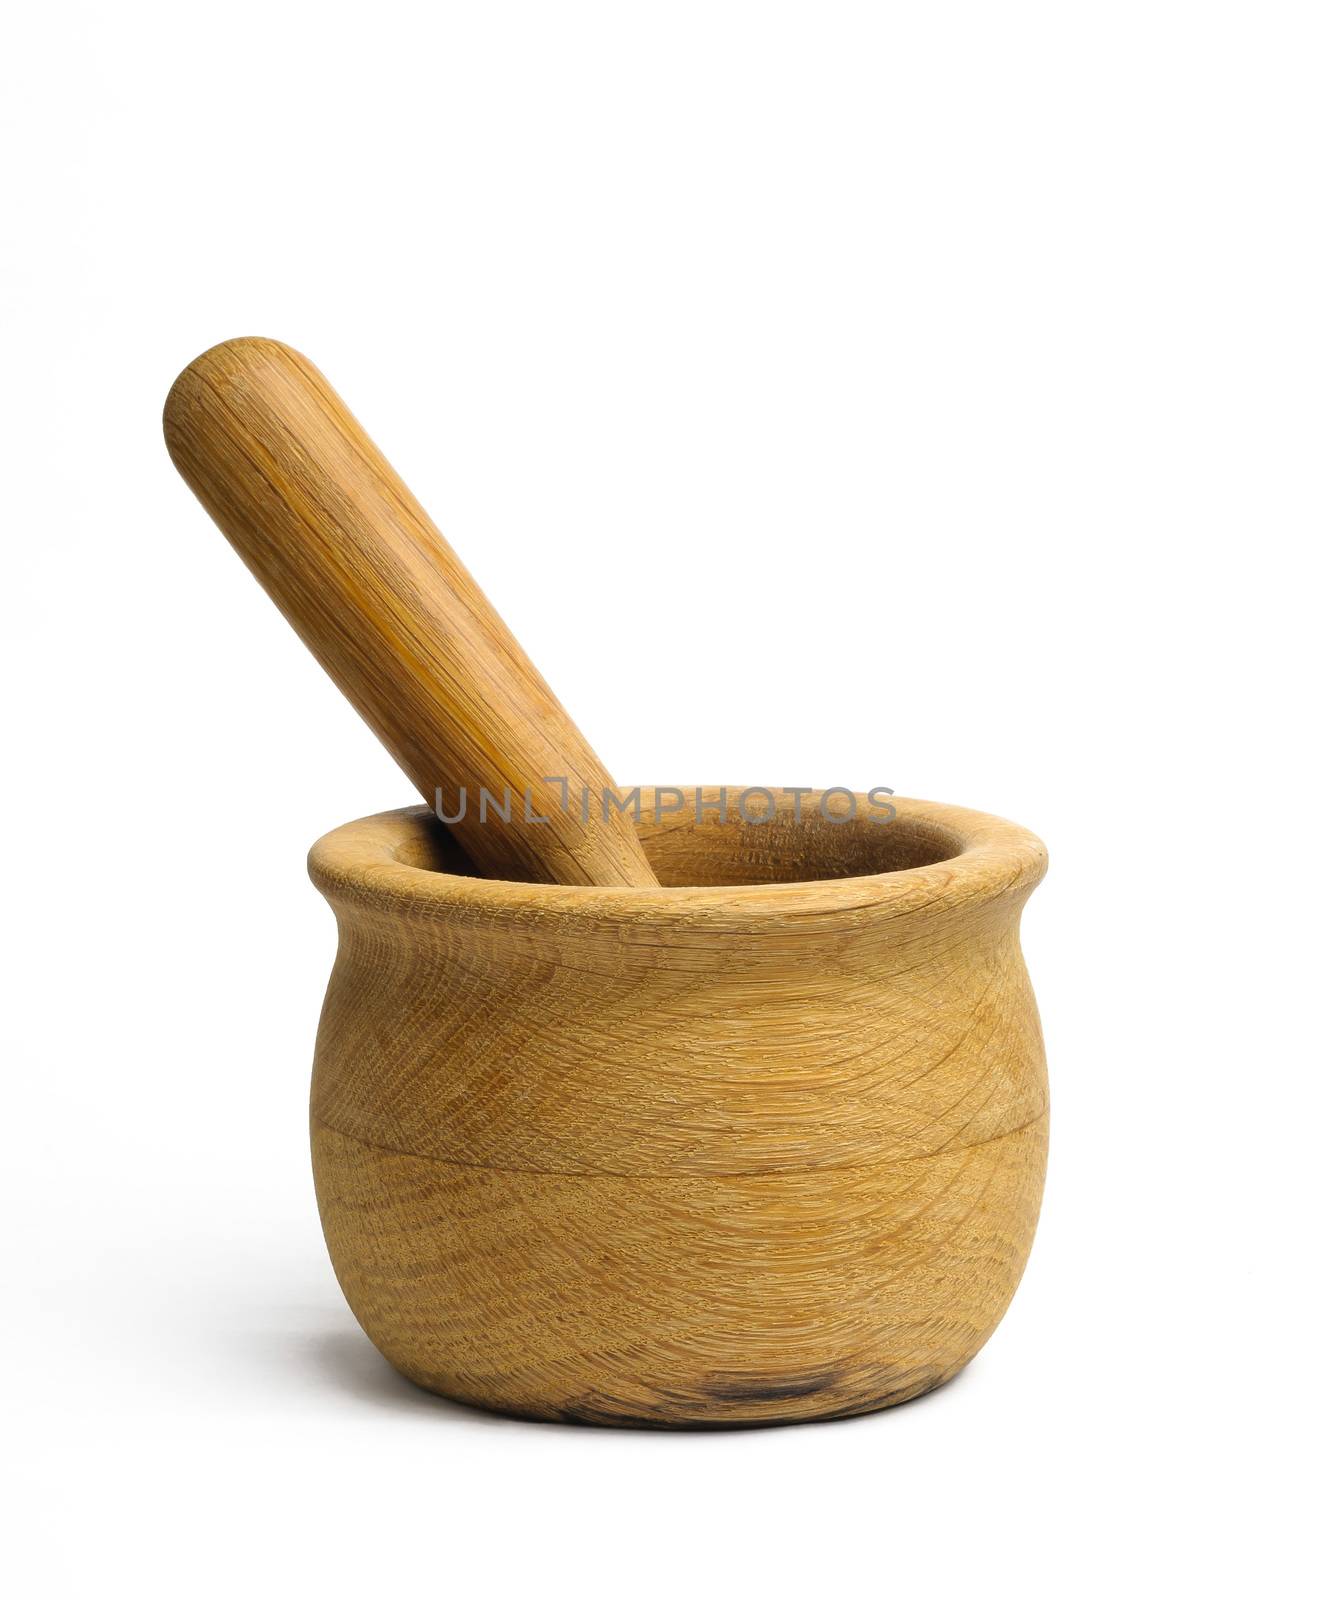 Olive Wood Mortar and Pestle  by MaxalTamor